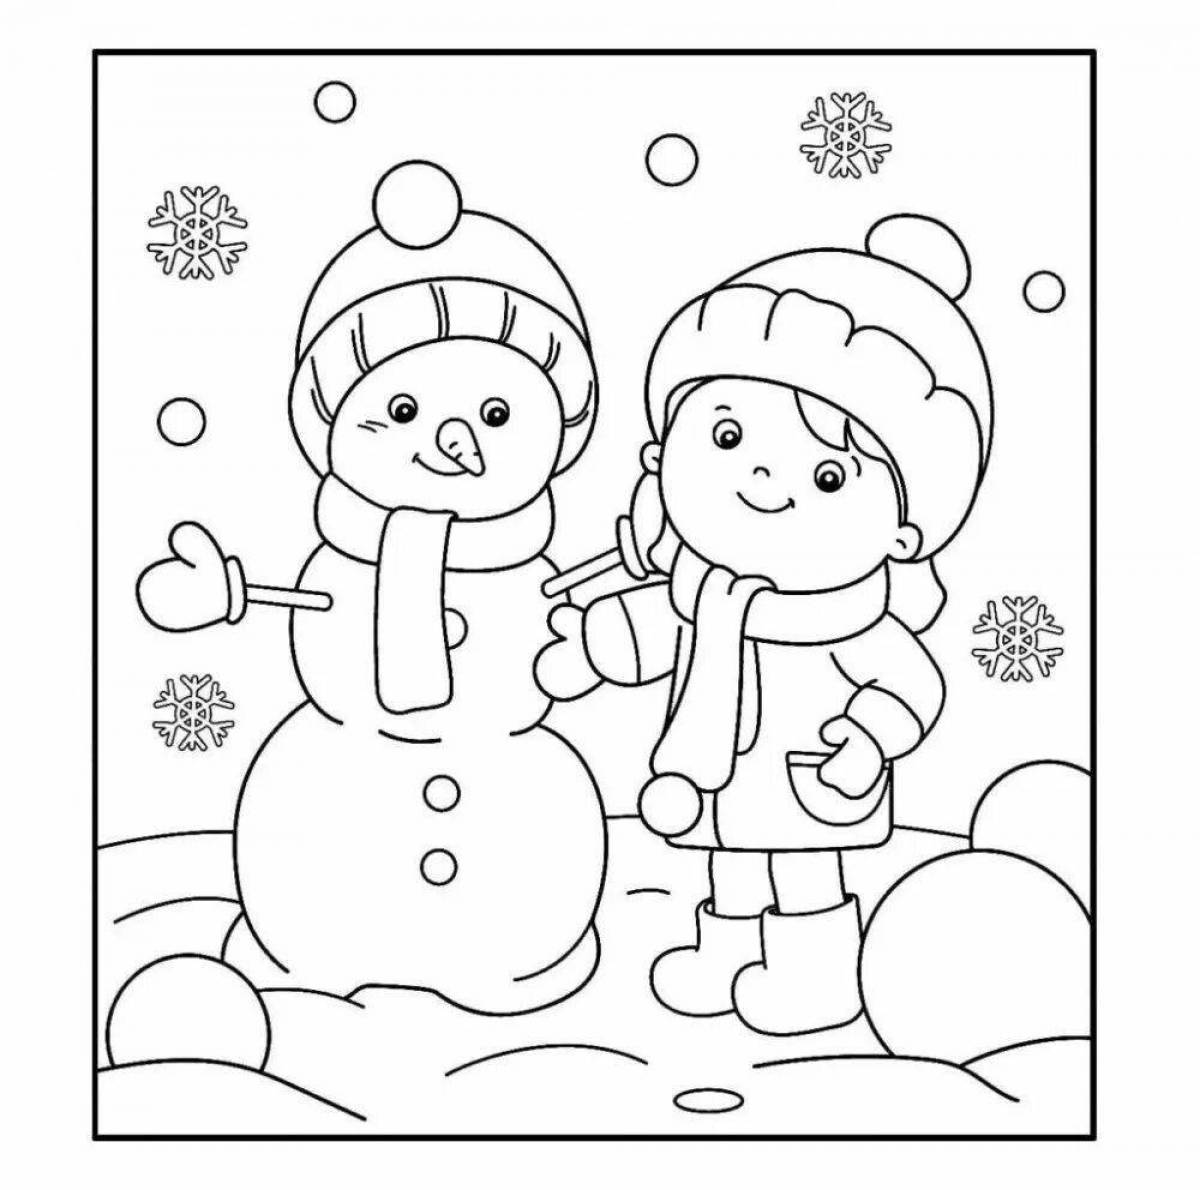 Outstanding snowman family coloring book